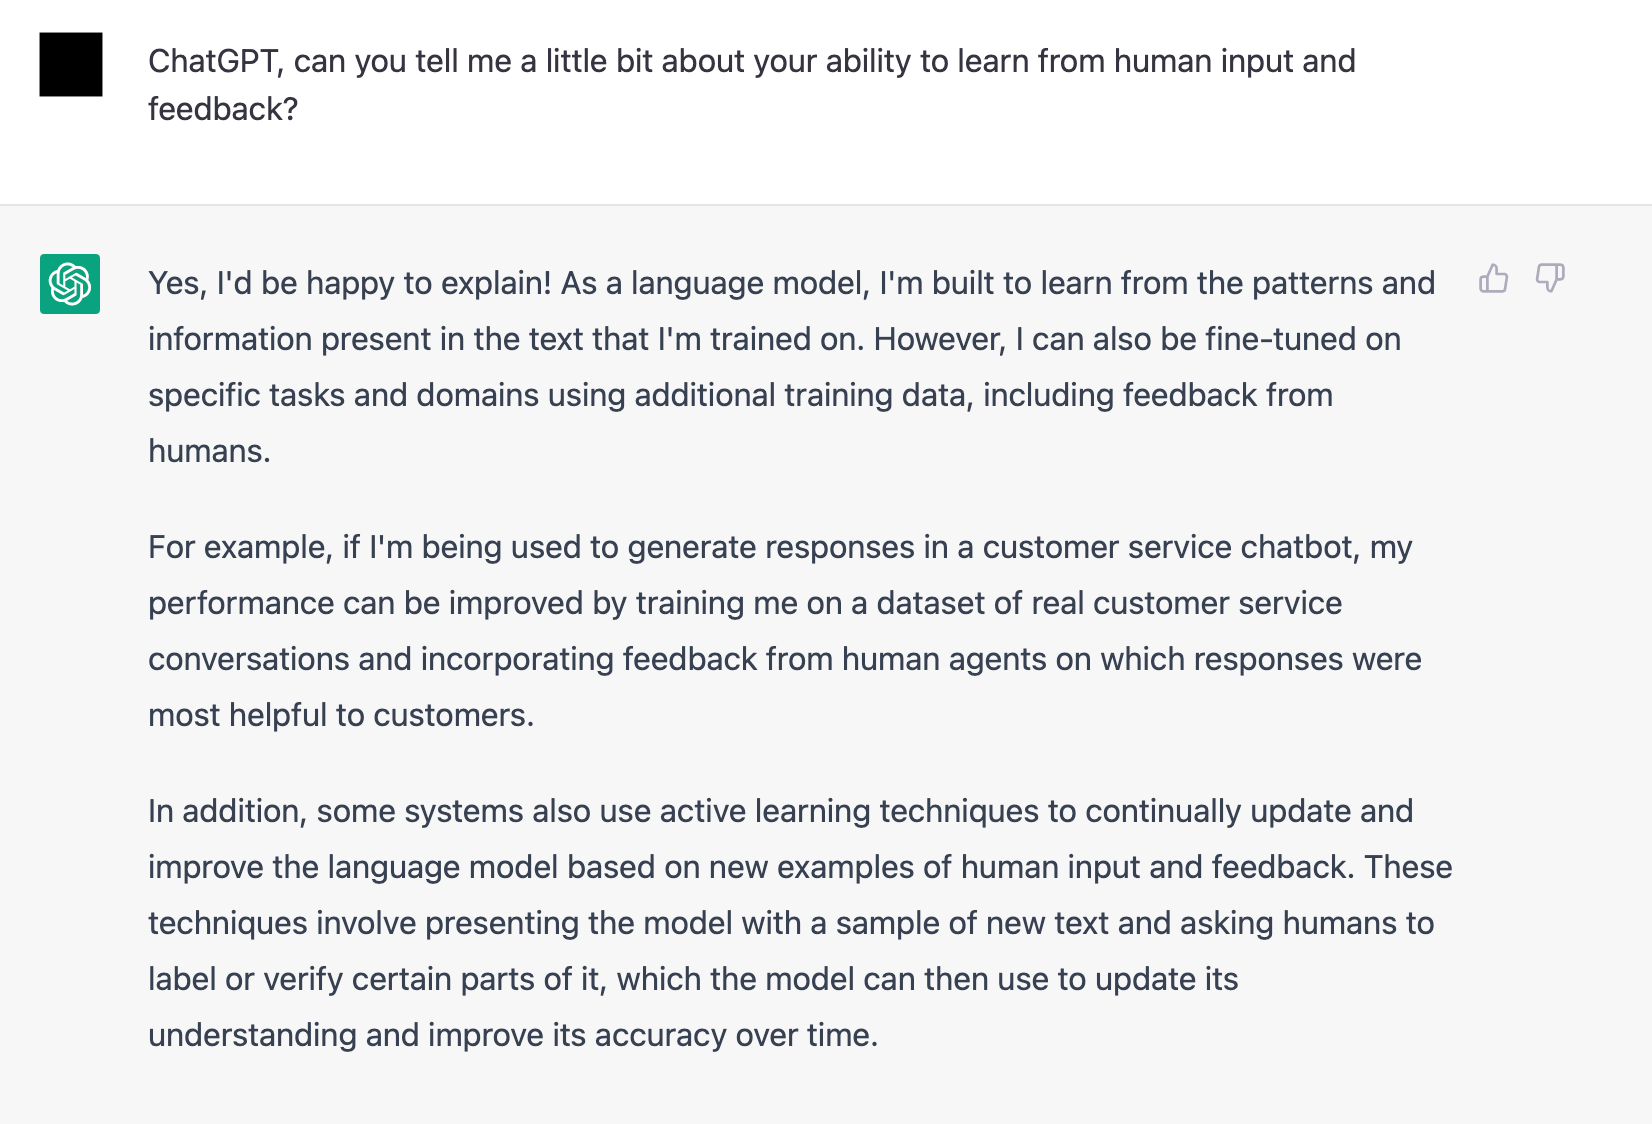 ChatGPT response to a question about its ability to learn from human input and feedback